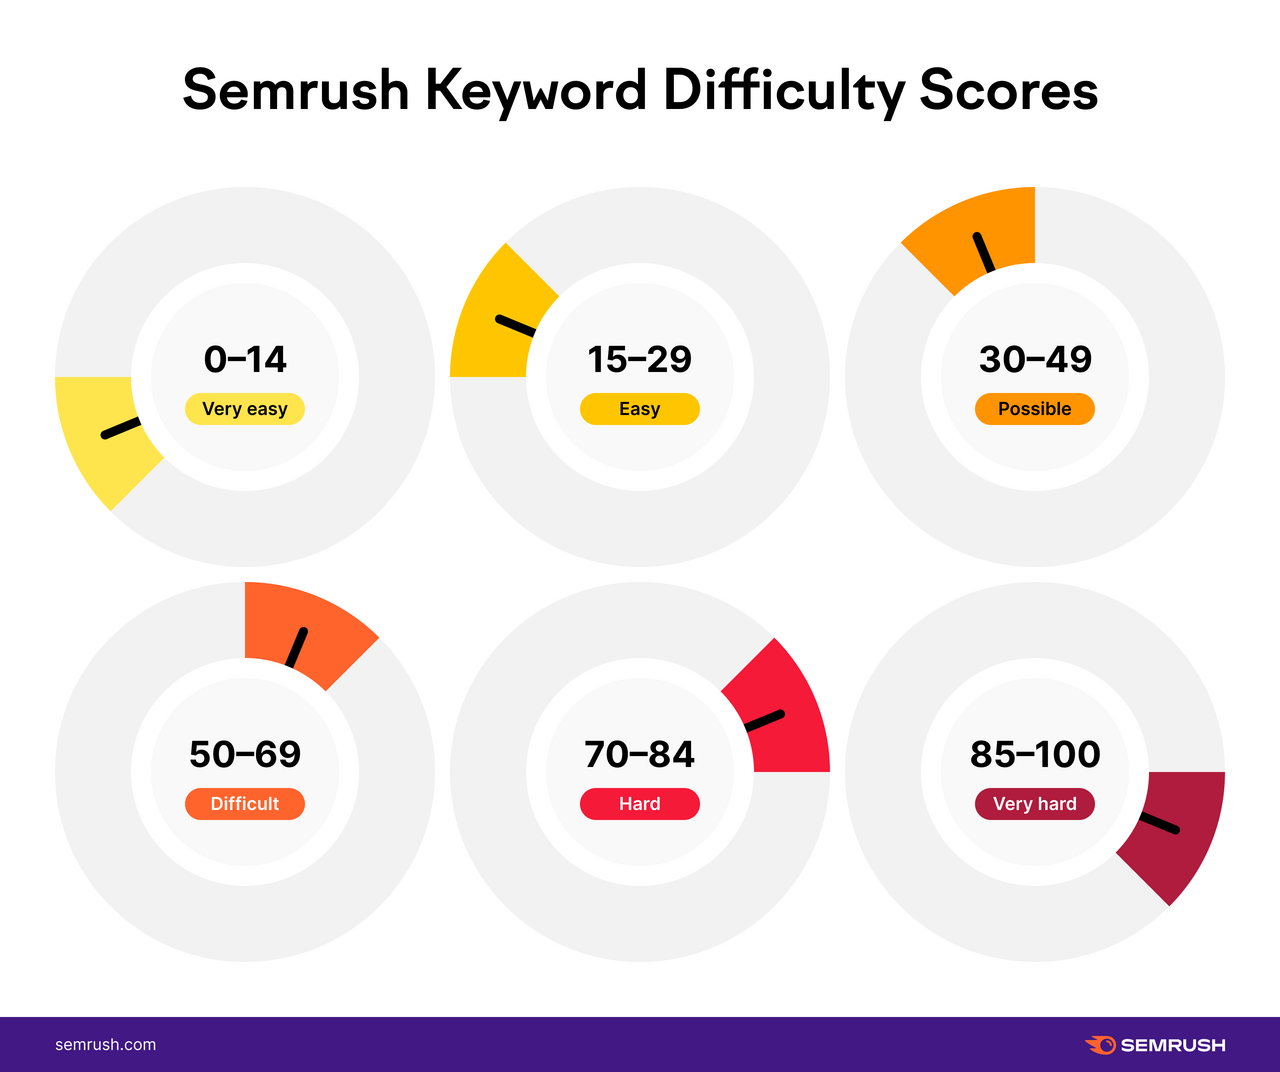 Semrush keyword difficulty scores: 0-14 very easy, 15-29 easy, 30-49 possible, 50-69 difficult, 70-84 hard, 85-100 very hard